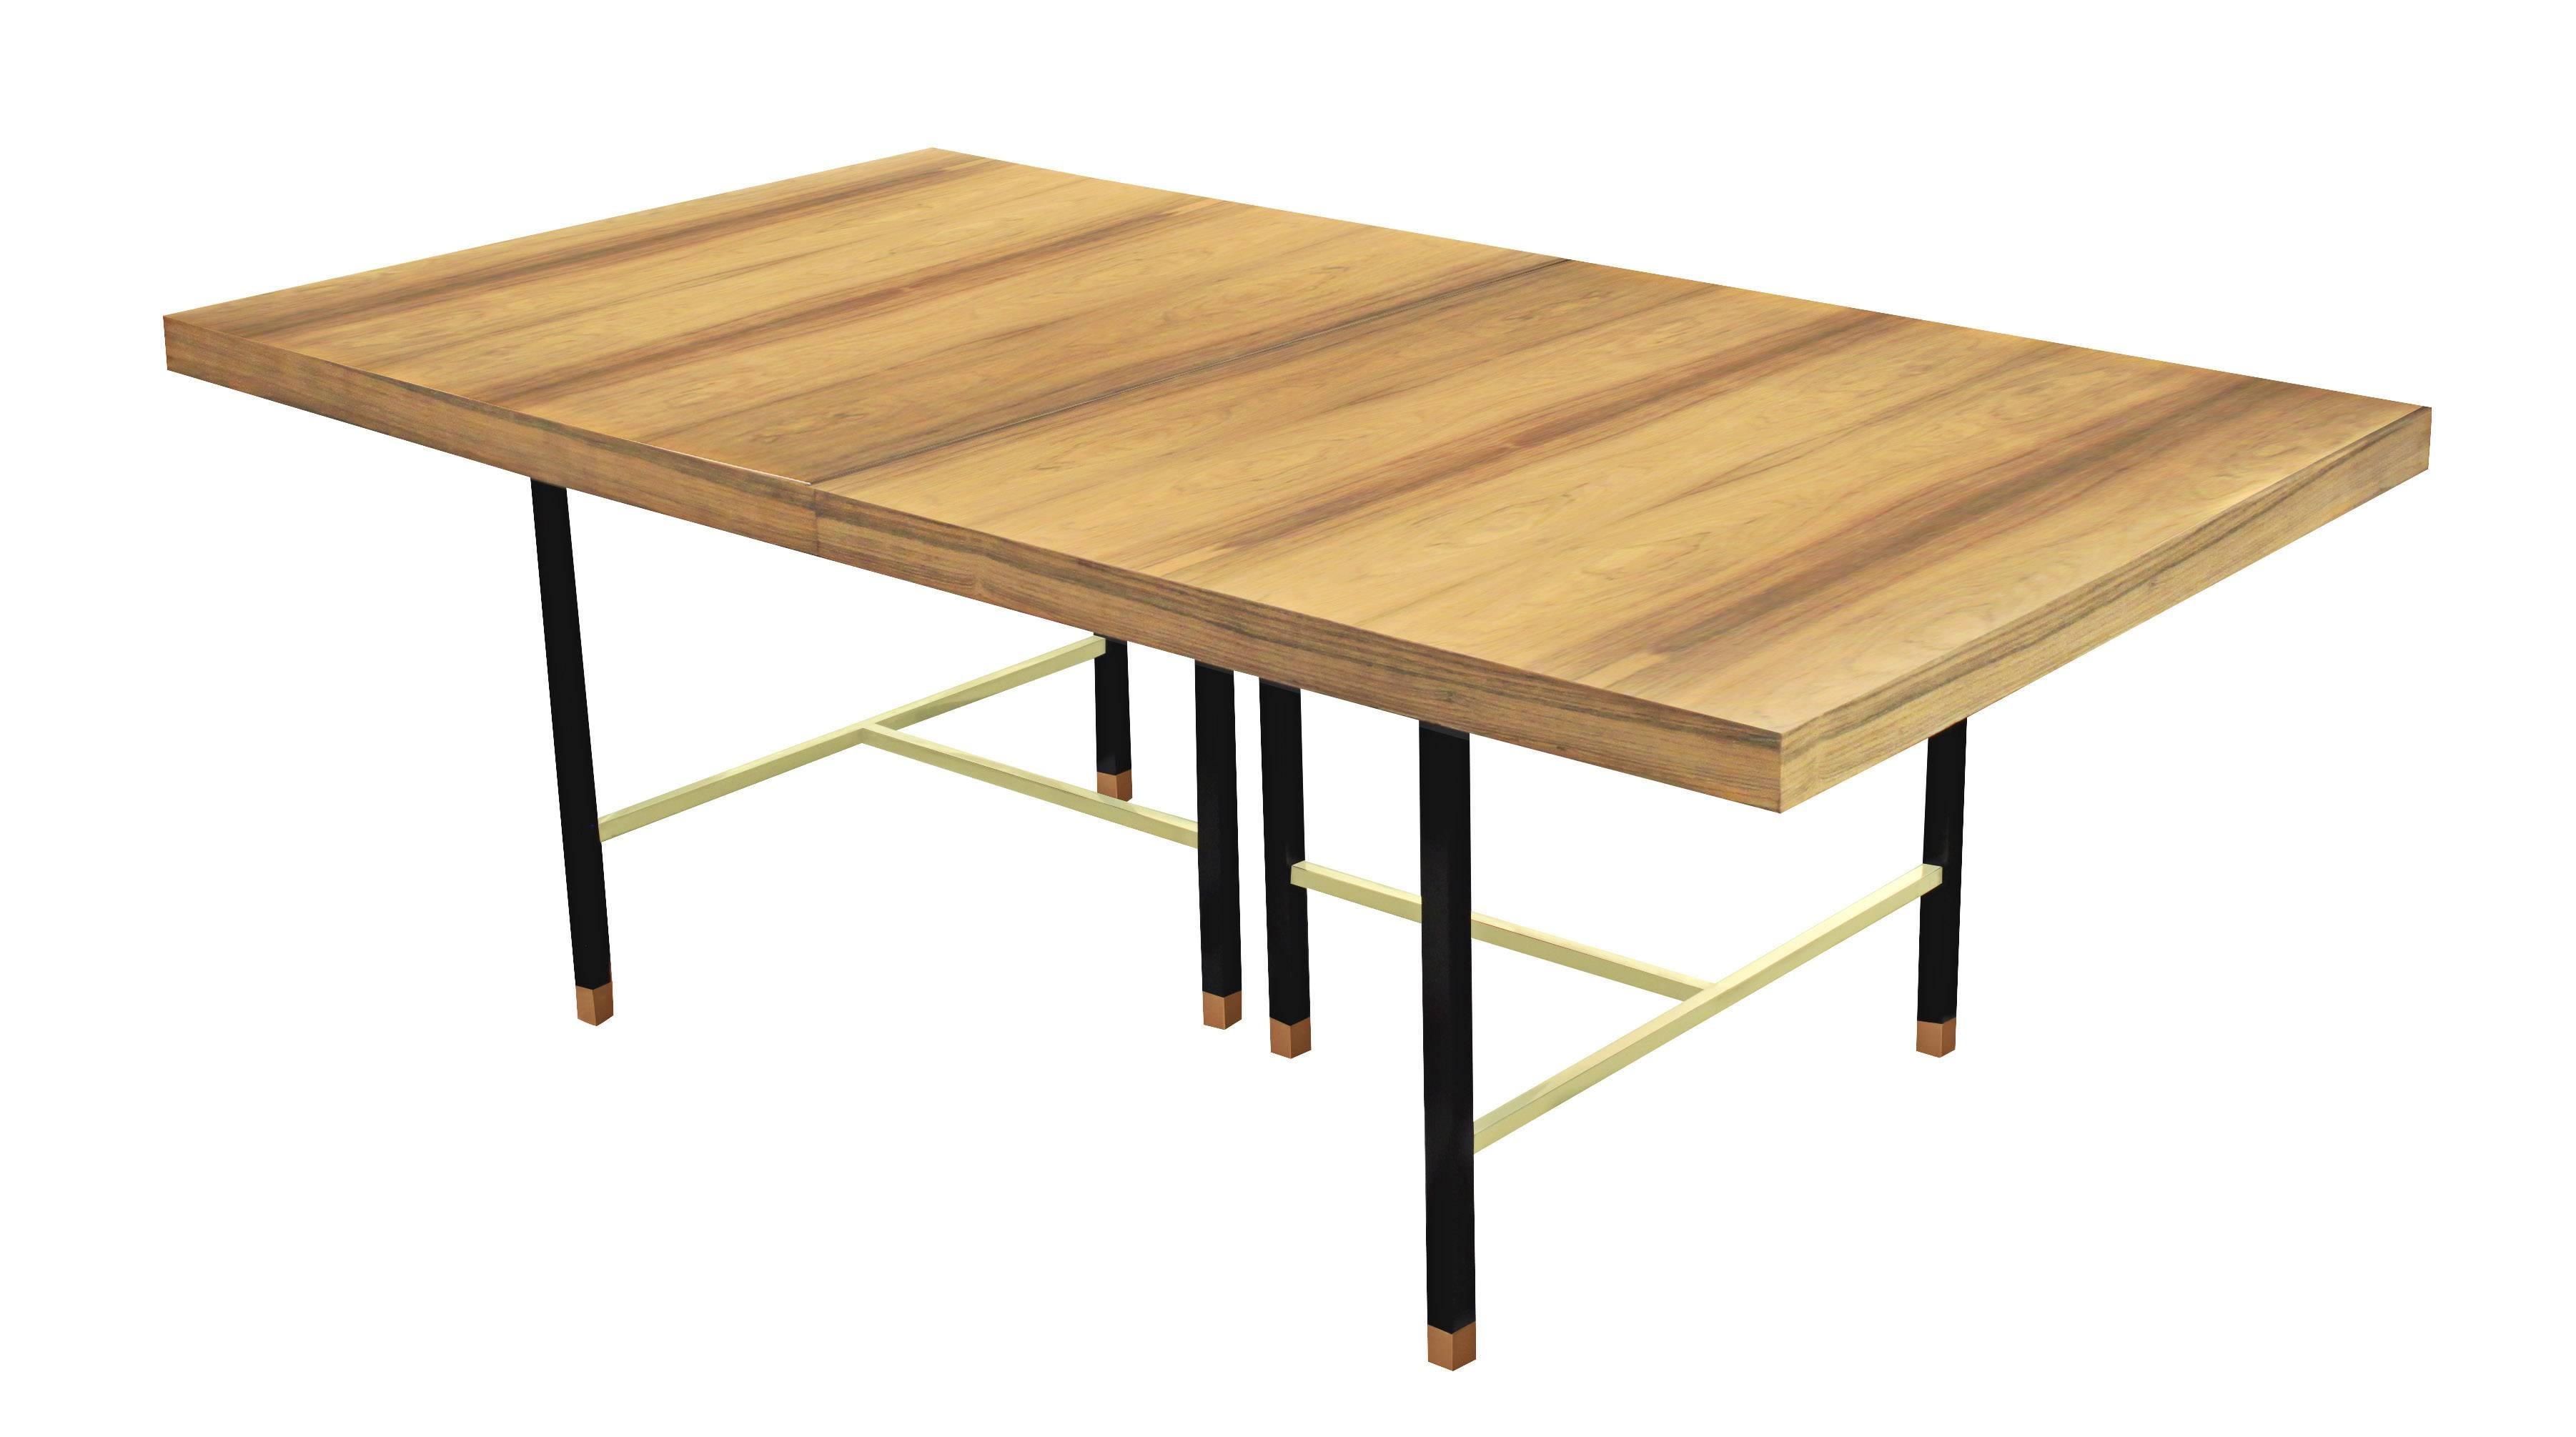 Dining table No. 819R with two leaves, top in bleached Brazilian rosewood and base in mahogany with brass stretchers, designed by Harvey Probber, American, 1950s. Table comes with 2 16 inch leaves. Table is 112 inches wide with both leaves and 80